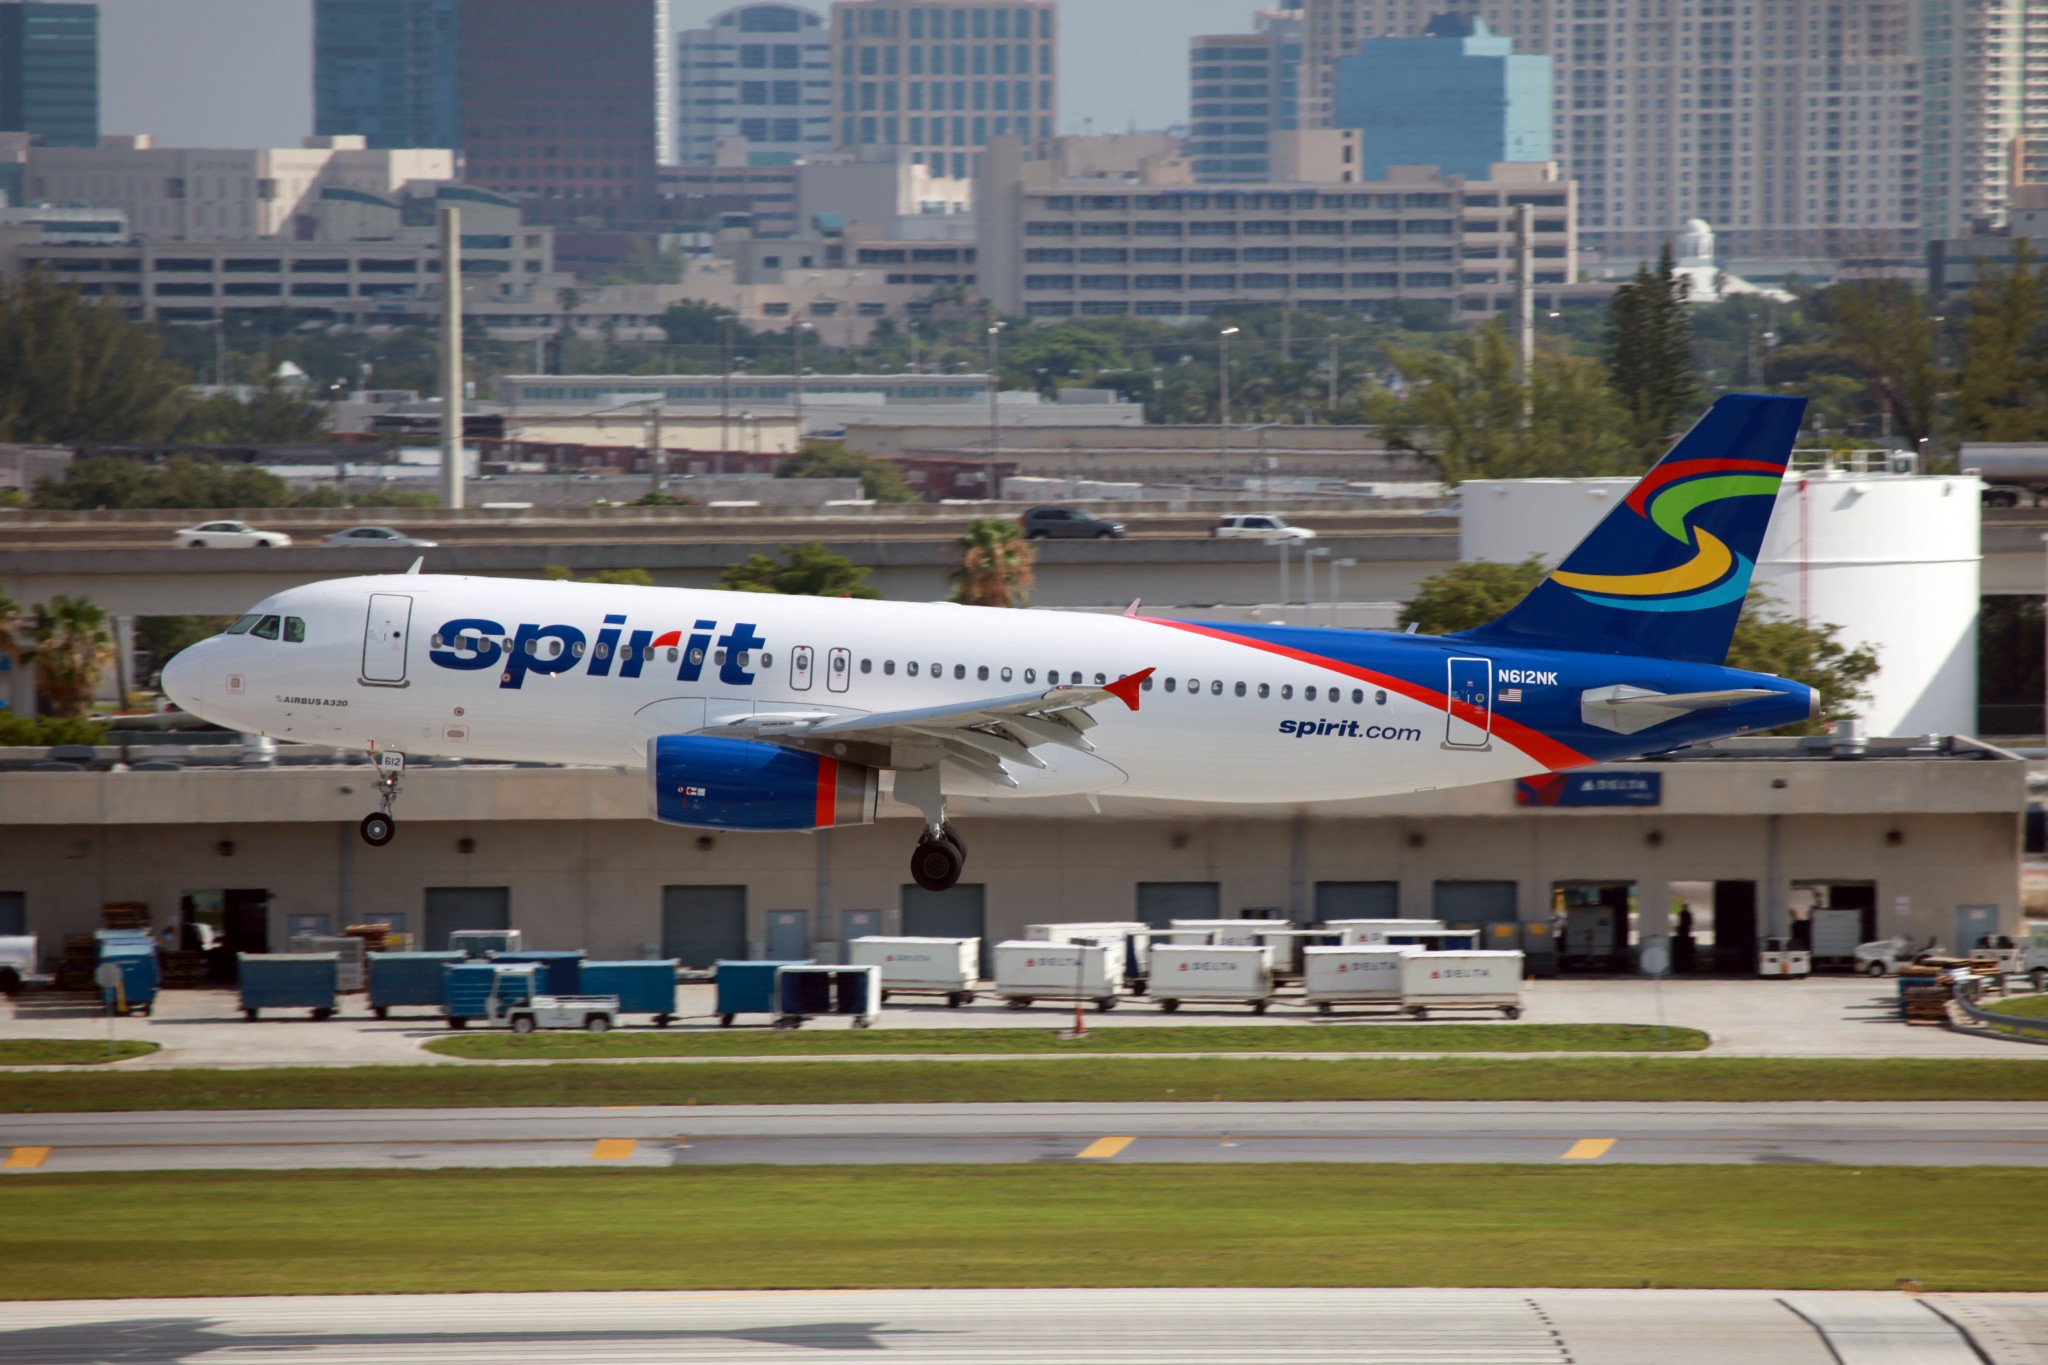 Spirit Airlines reports fourth quarter and full year 2017 results